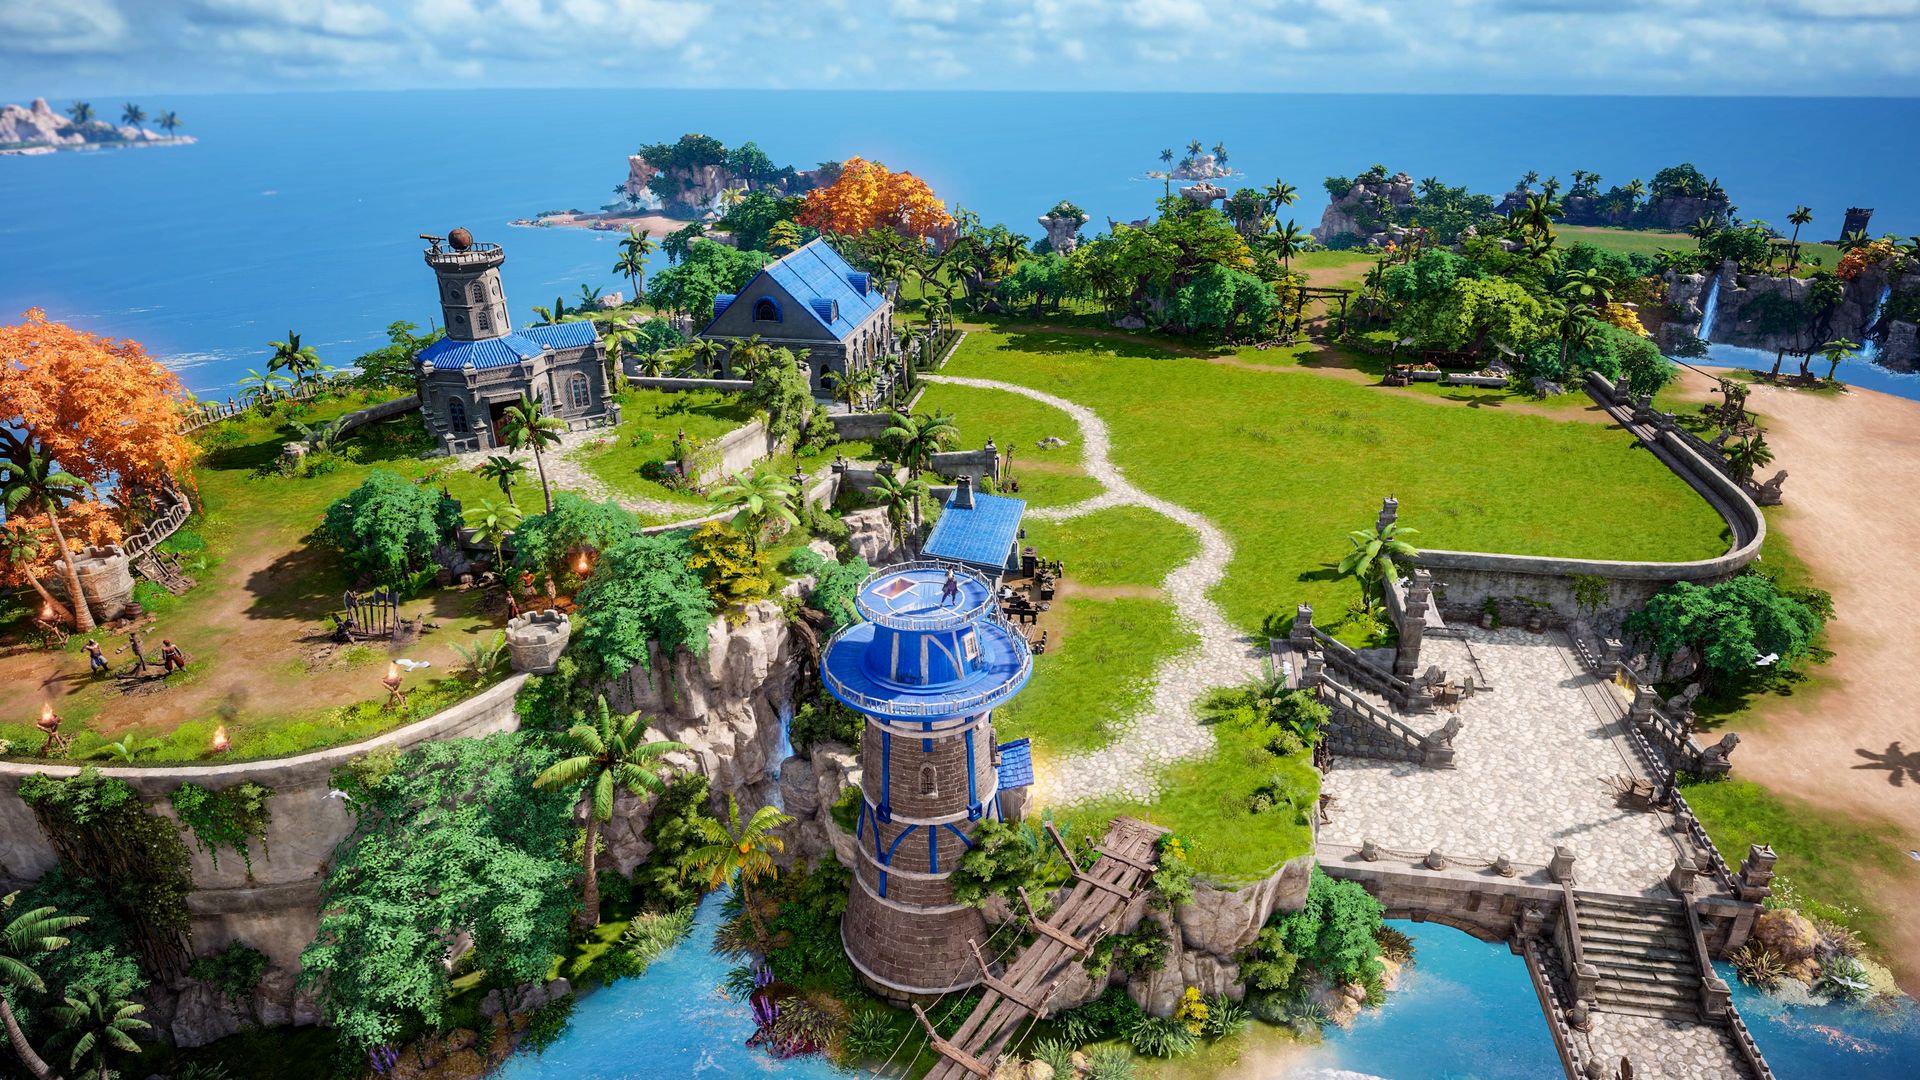 Oblivion Isle is one of the many Adventure Islands found on Arkesia's open seas in Lost Ark. We are going to explain the island's location, boss mechanics, and possible rewards in detail. The game identifies this place as "a heavenly island with beautiful scenery" and you will find a lot of rewards there.